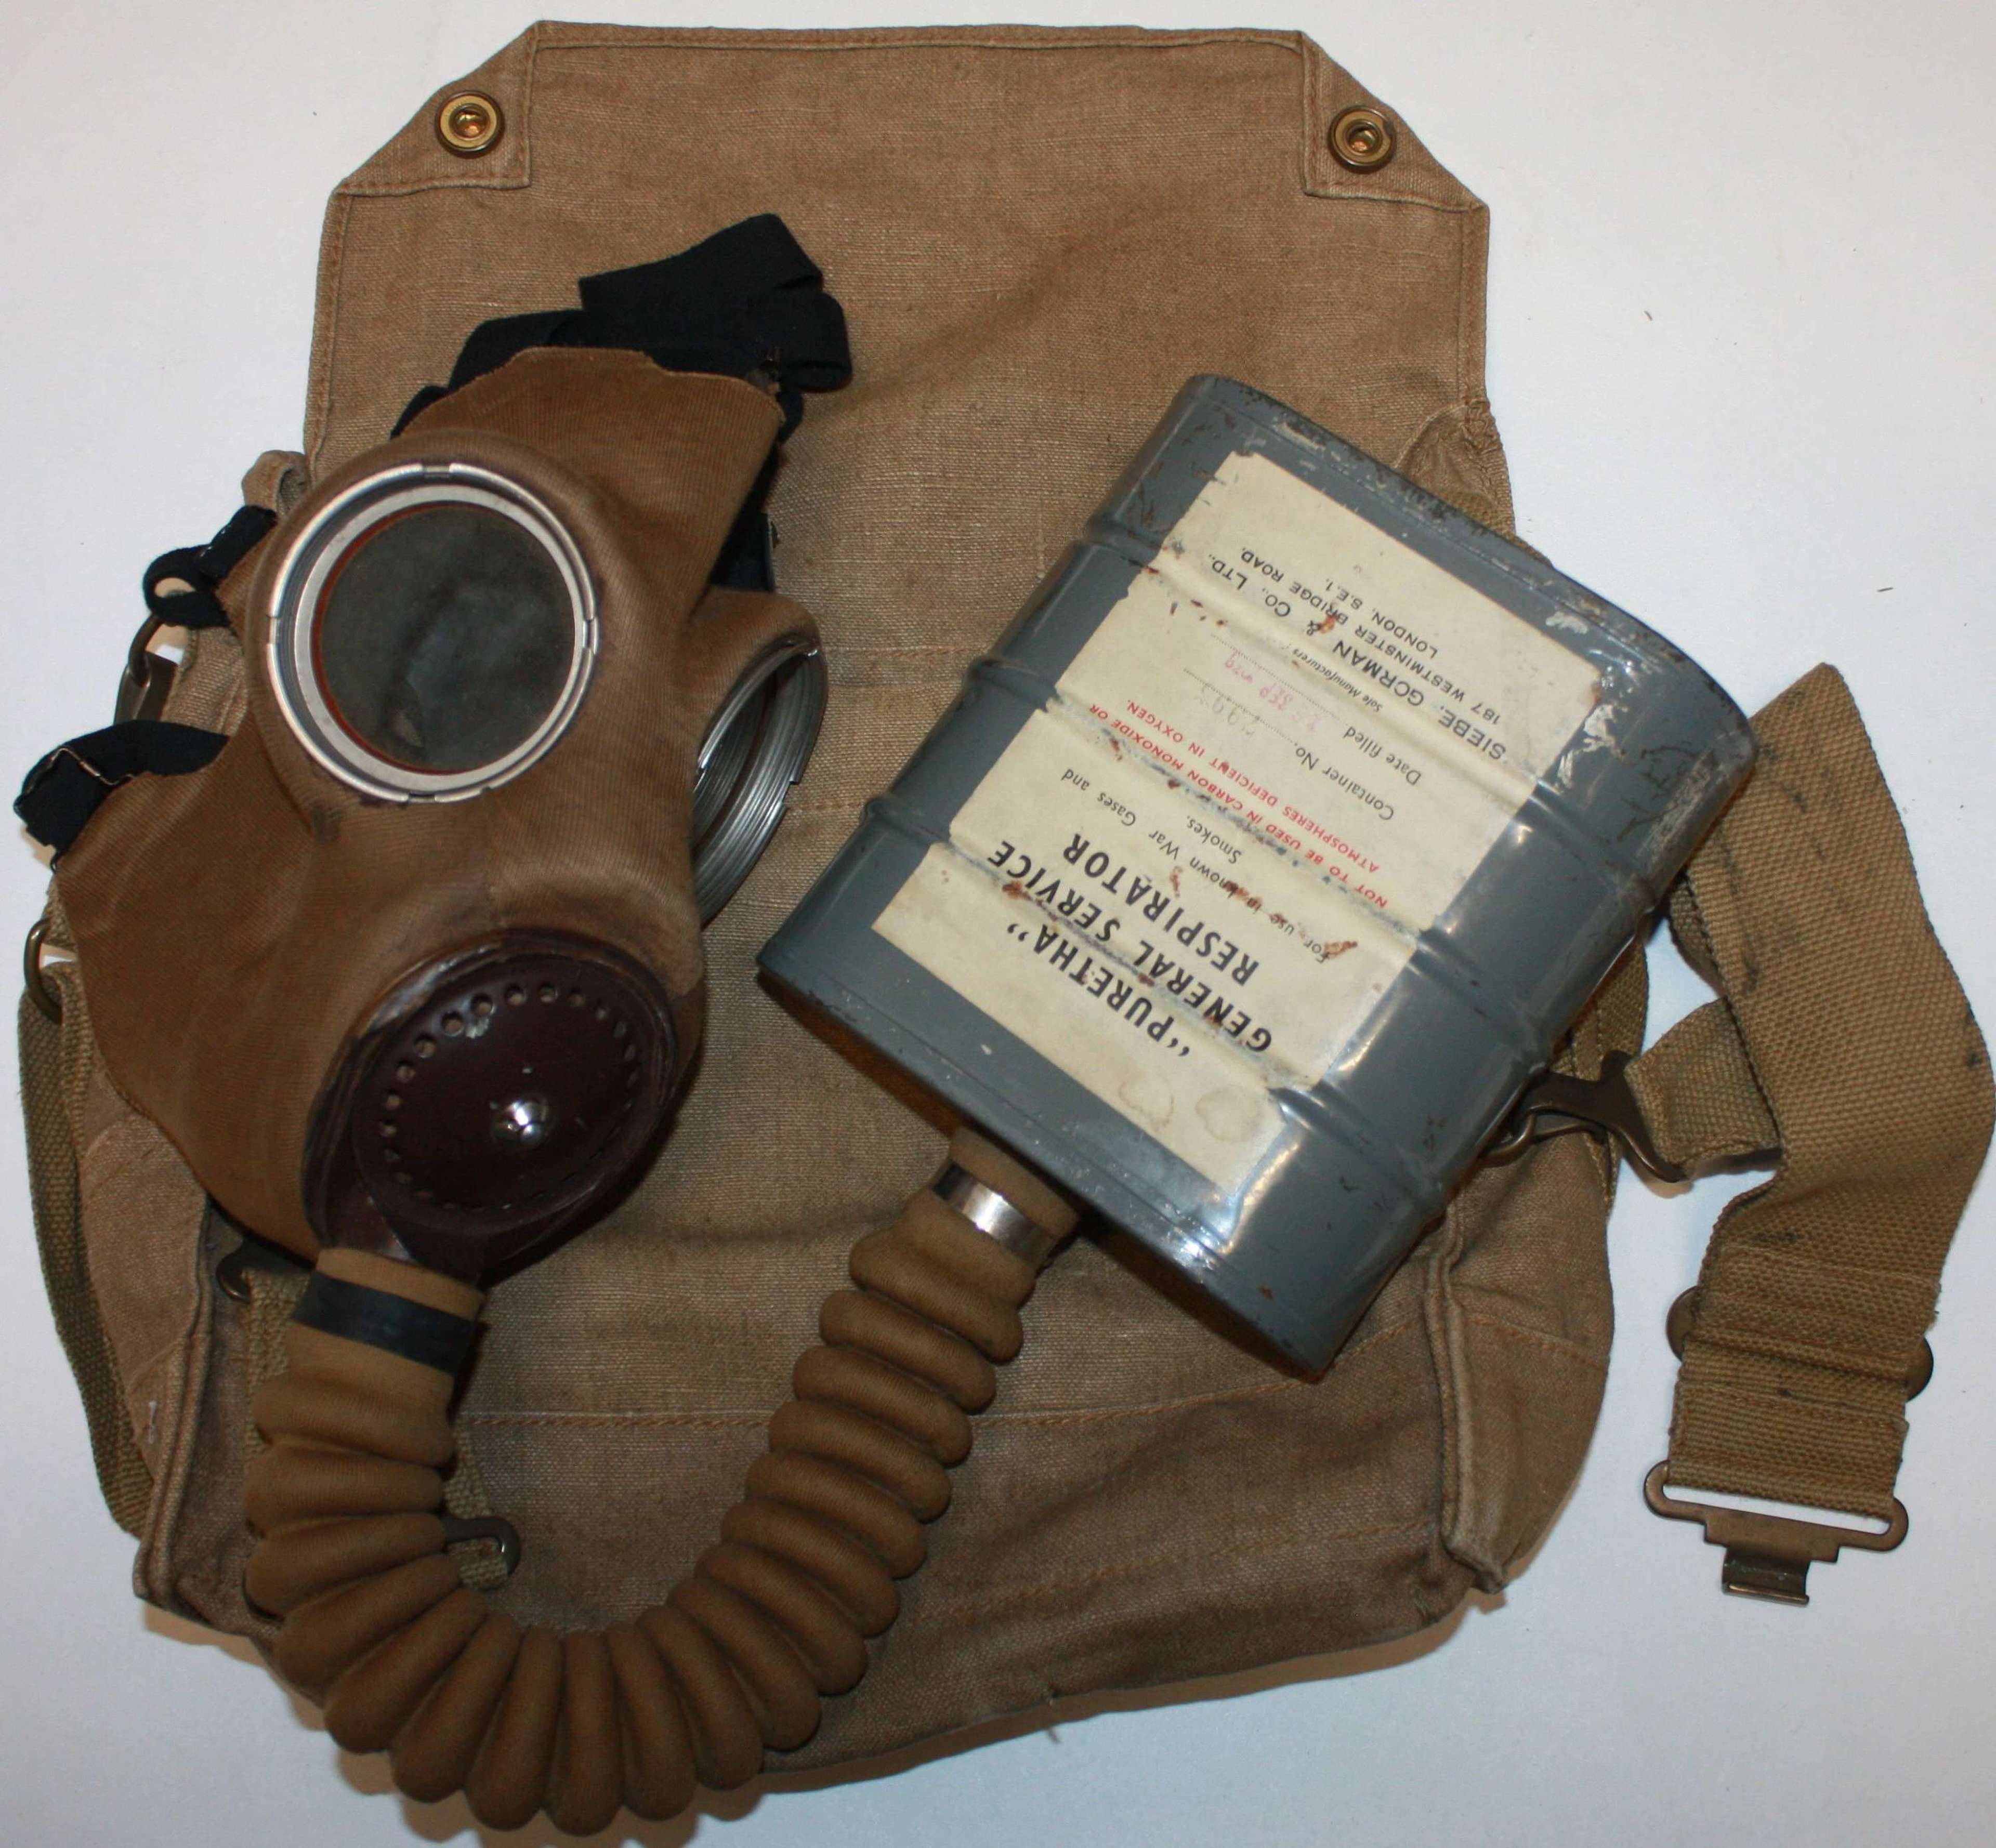 A GOOD EARLY / PRE  WWII GAS MASK SET  EARLY BELT TYPE GAS MASK